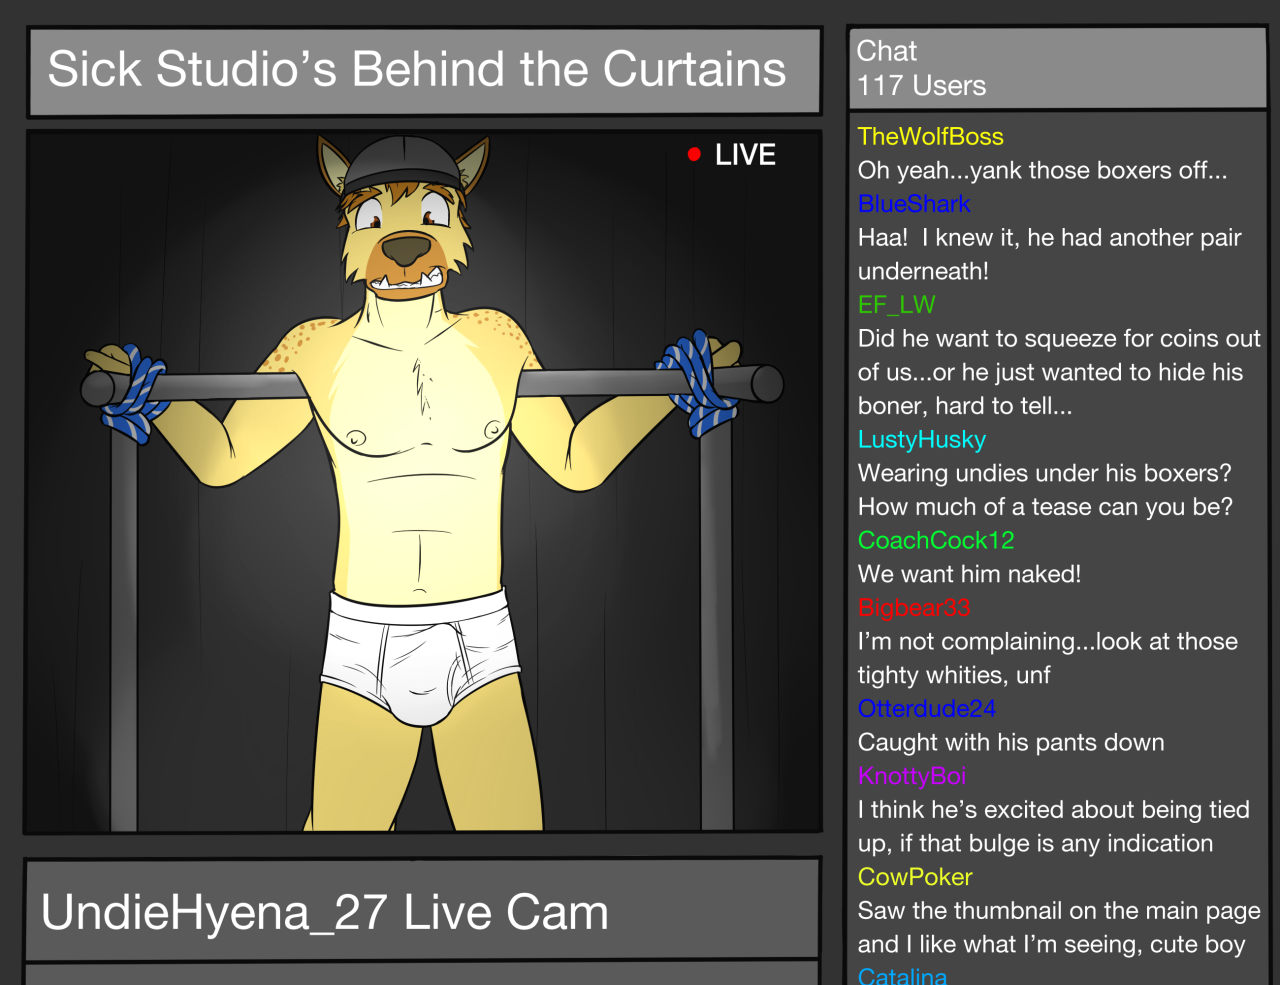 Hyena Cam Show pt3Seems undiehyena lives up to his username, and a strange guest